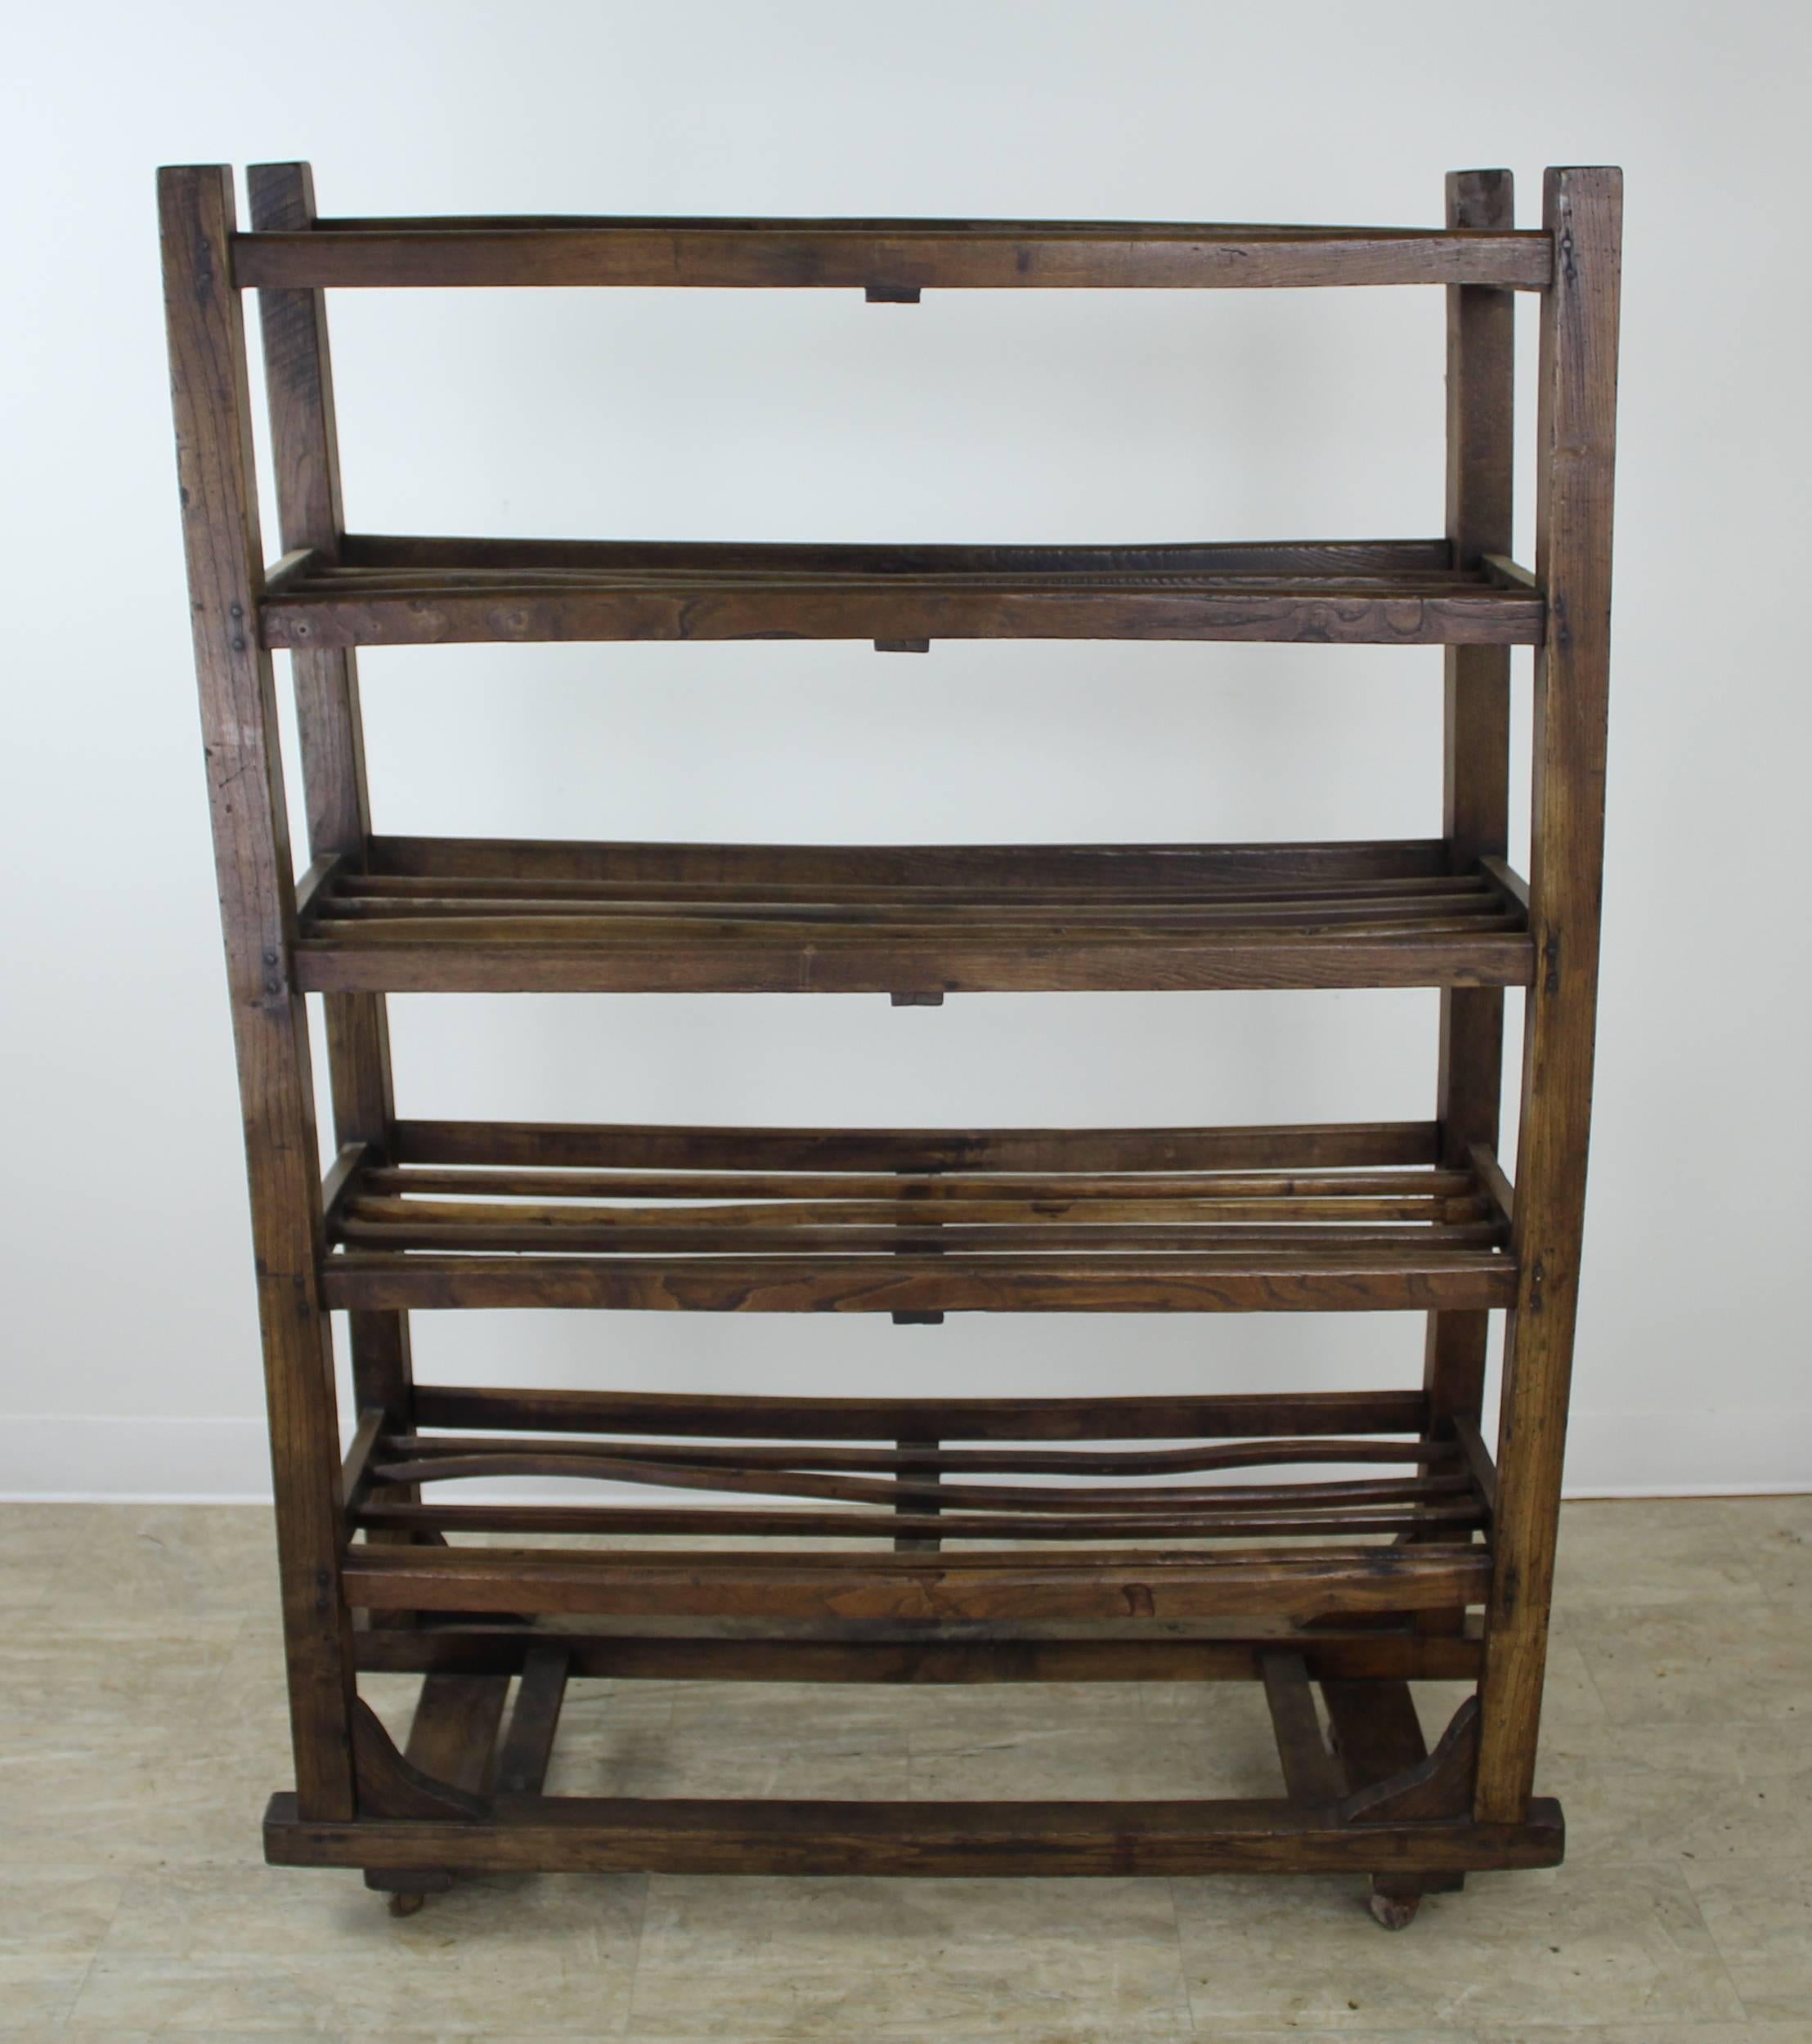 A beautiful elm apple rack, with endless possibilities. This piece boasts all of the desirable qualities of the best wooden antiques. Great color and patina, with its nice elm grain fully on display (see image #7). The slats on each shelf are hand